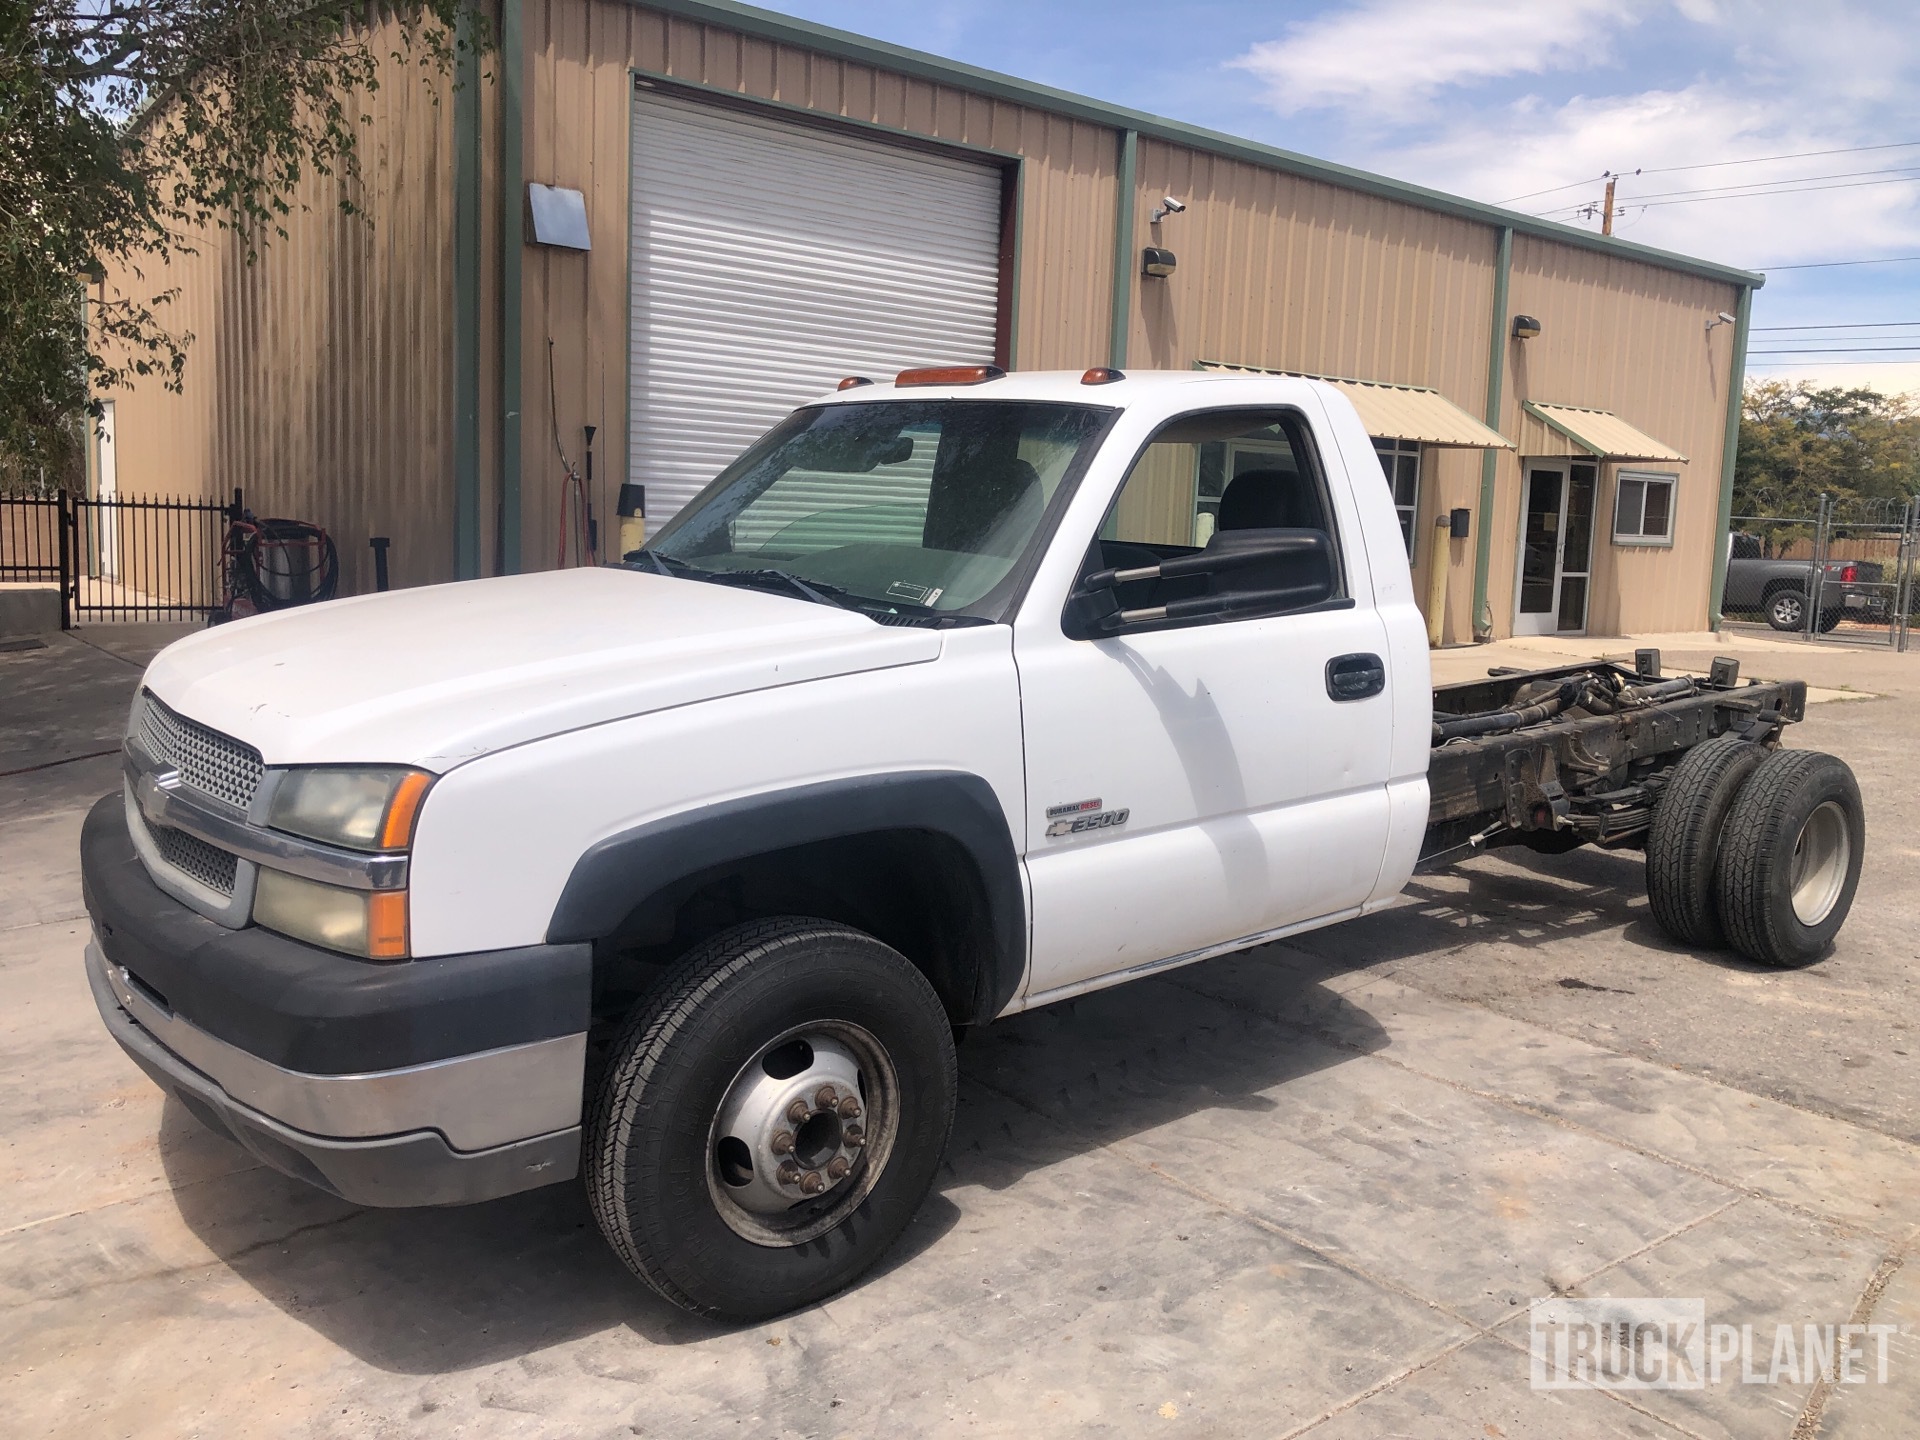 2003 Chevrolet Silverado 3500 4x2 Cab and Chassis in Albuquerque, New  Mexico, United States (TruckPlanet Item #7383627)